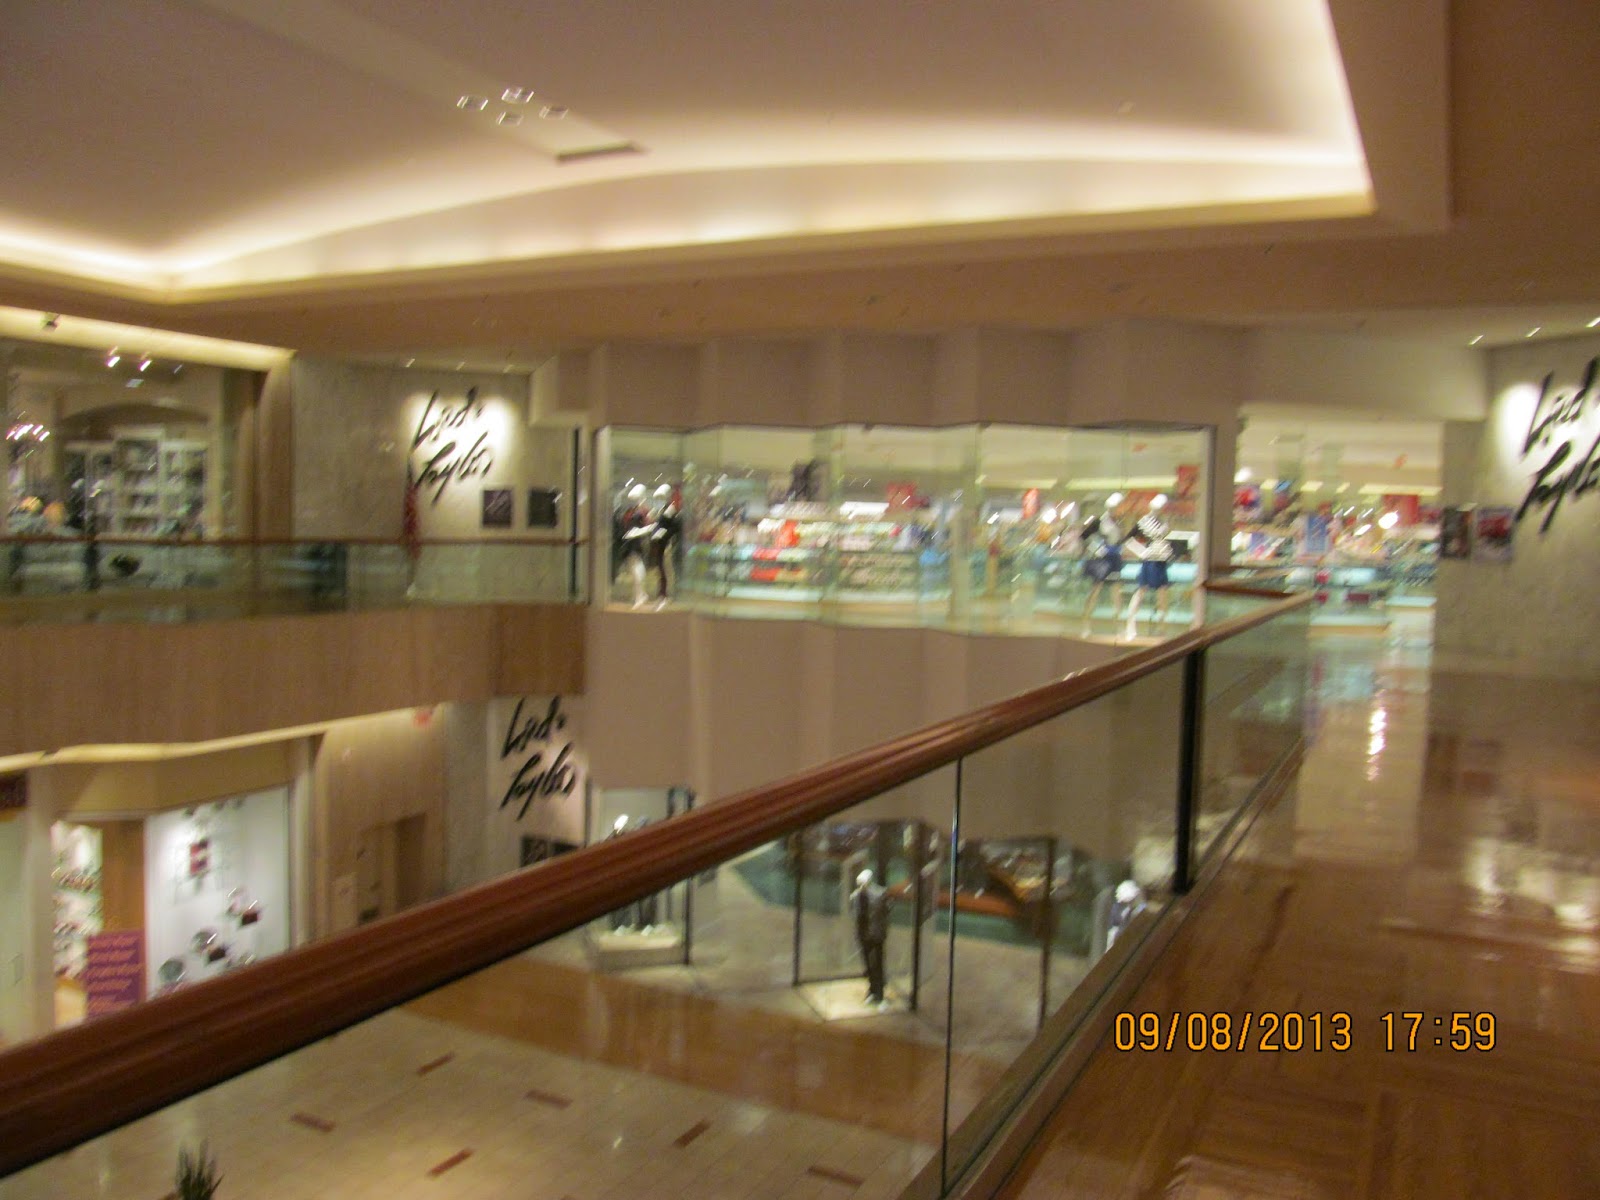 Trip to the Mall: Northbrook Court-(Northbrook, IL).